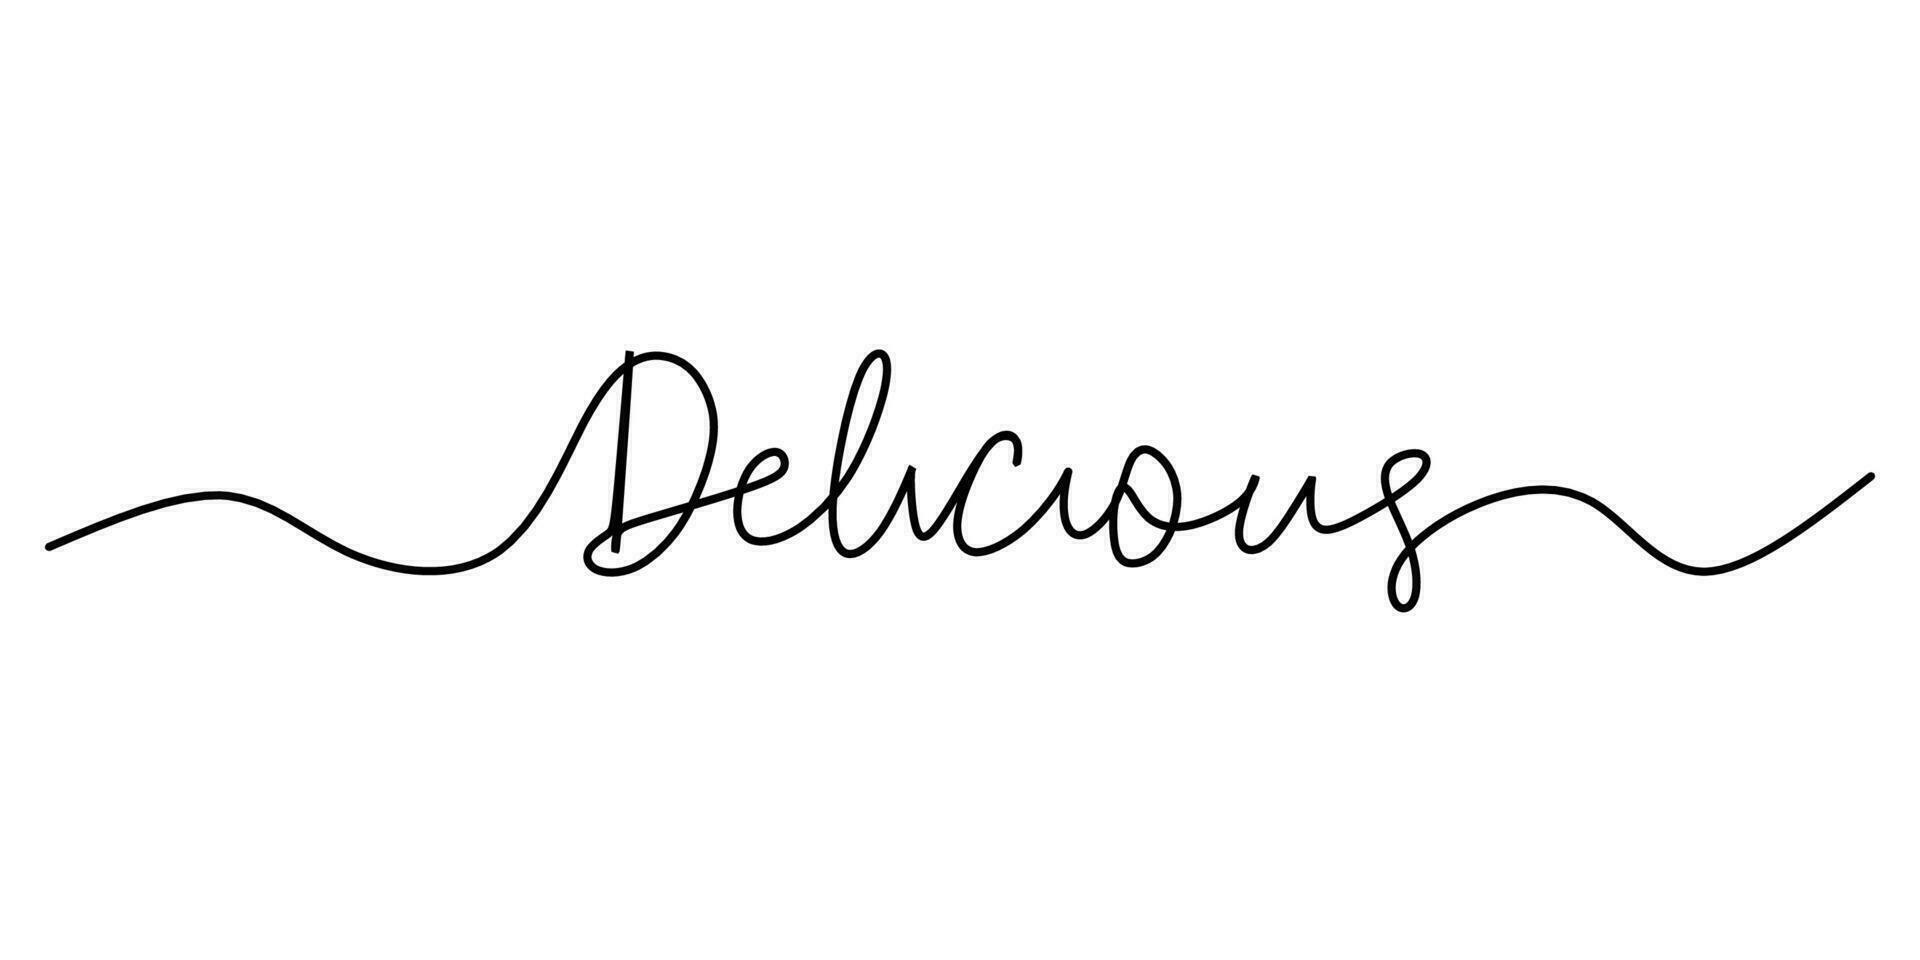 One continuous line drawing typography line art of delicious word vector